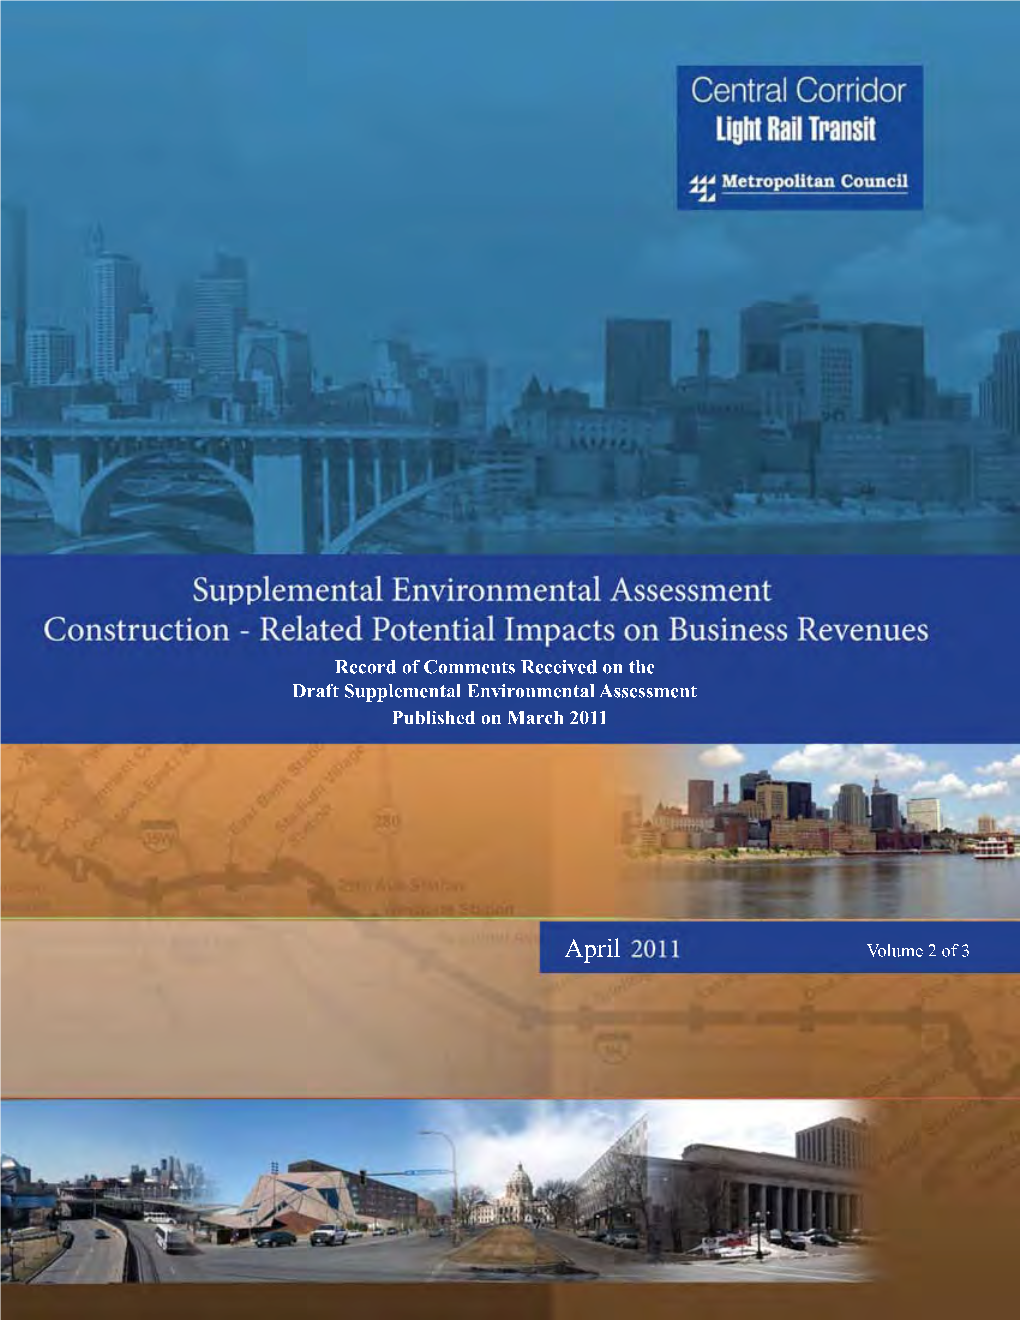 Supplemental Environmental Assessment Construction-Related Potential Impacts on Business Revenues